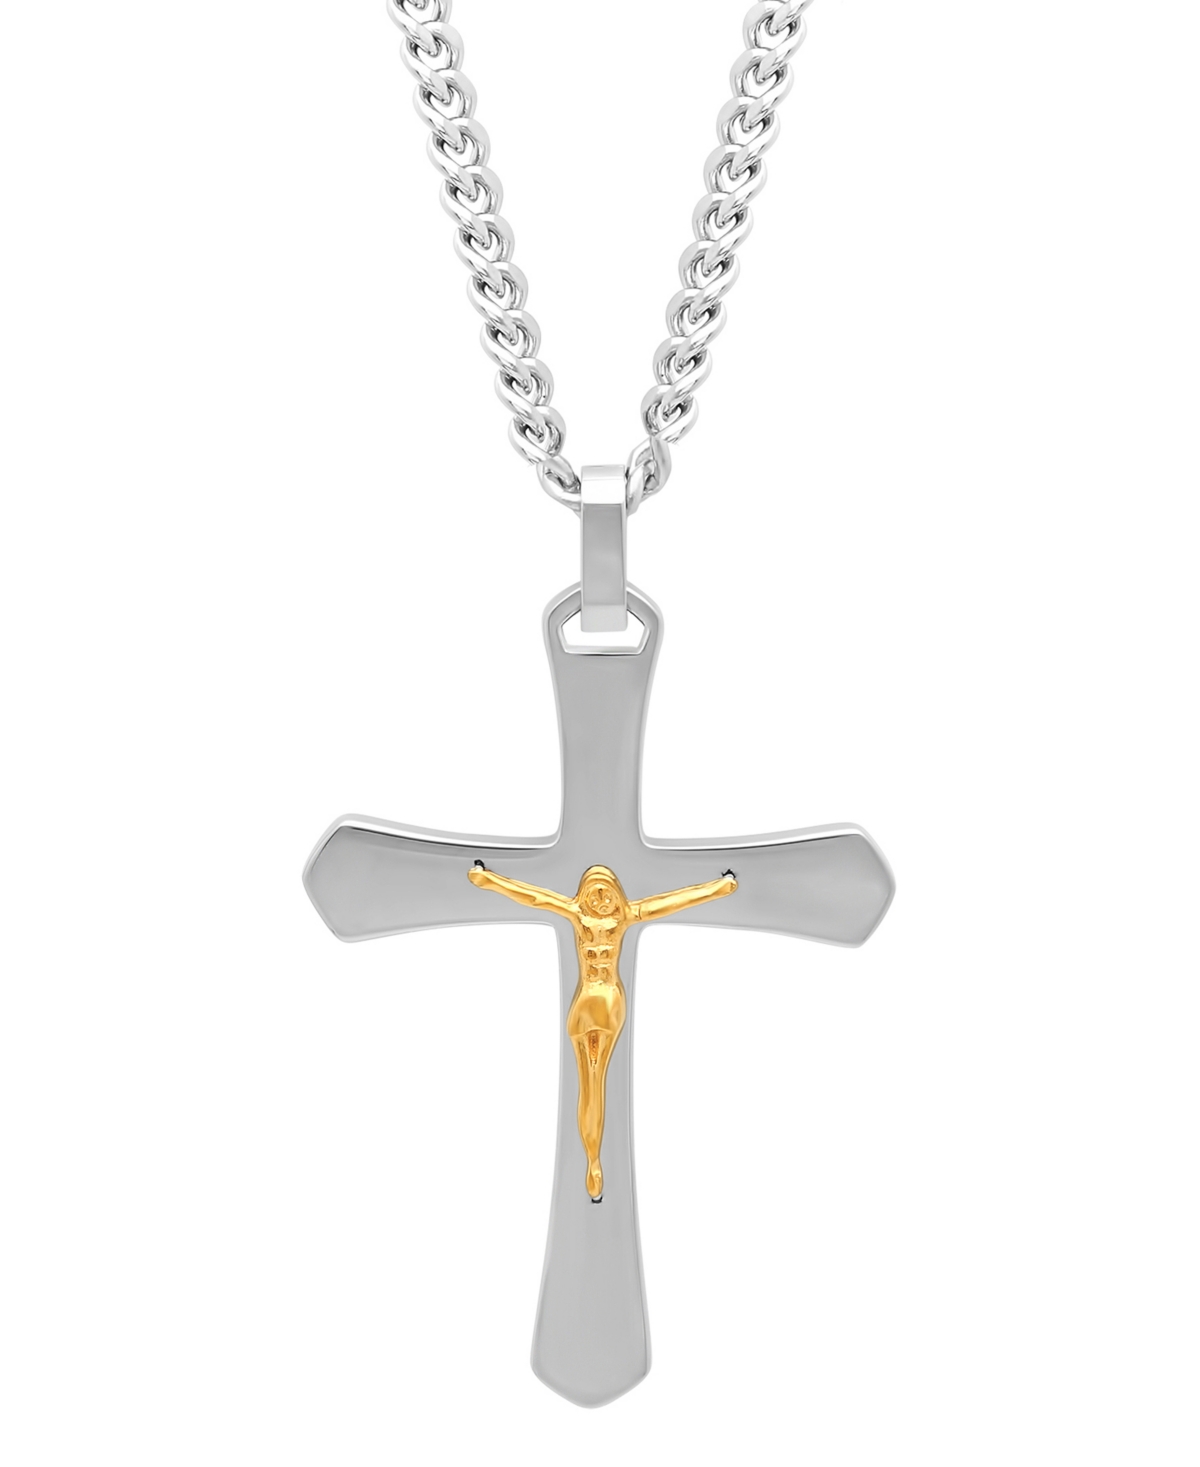 C & c Jewelry Macy's Men's Crucifix Pendant Necklace in Two-Tone Stainless Steel